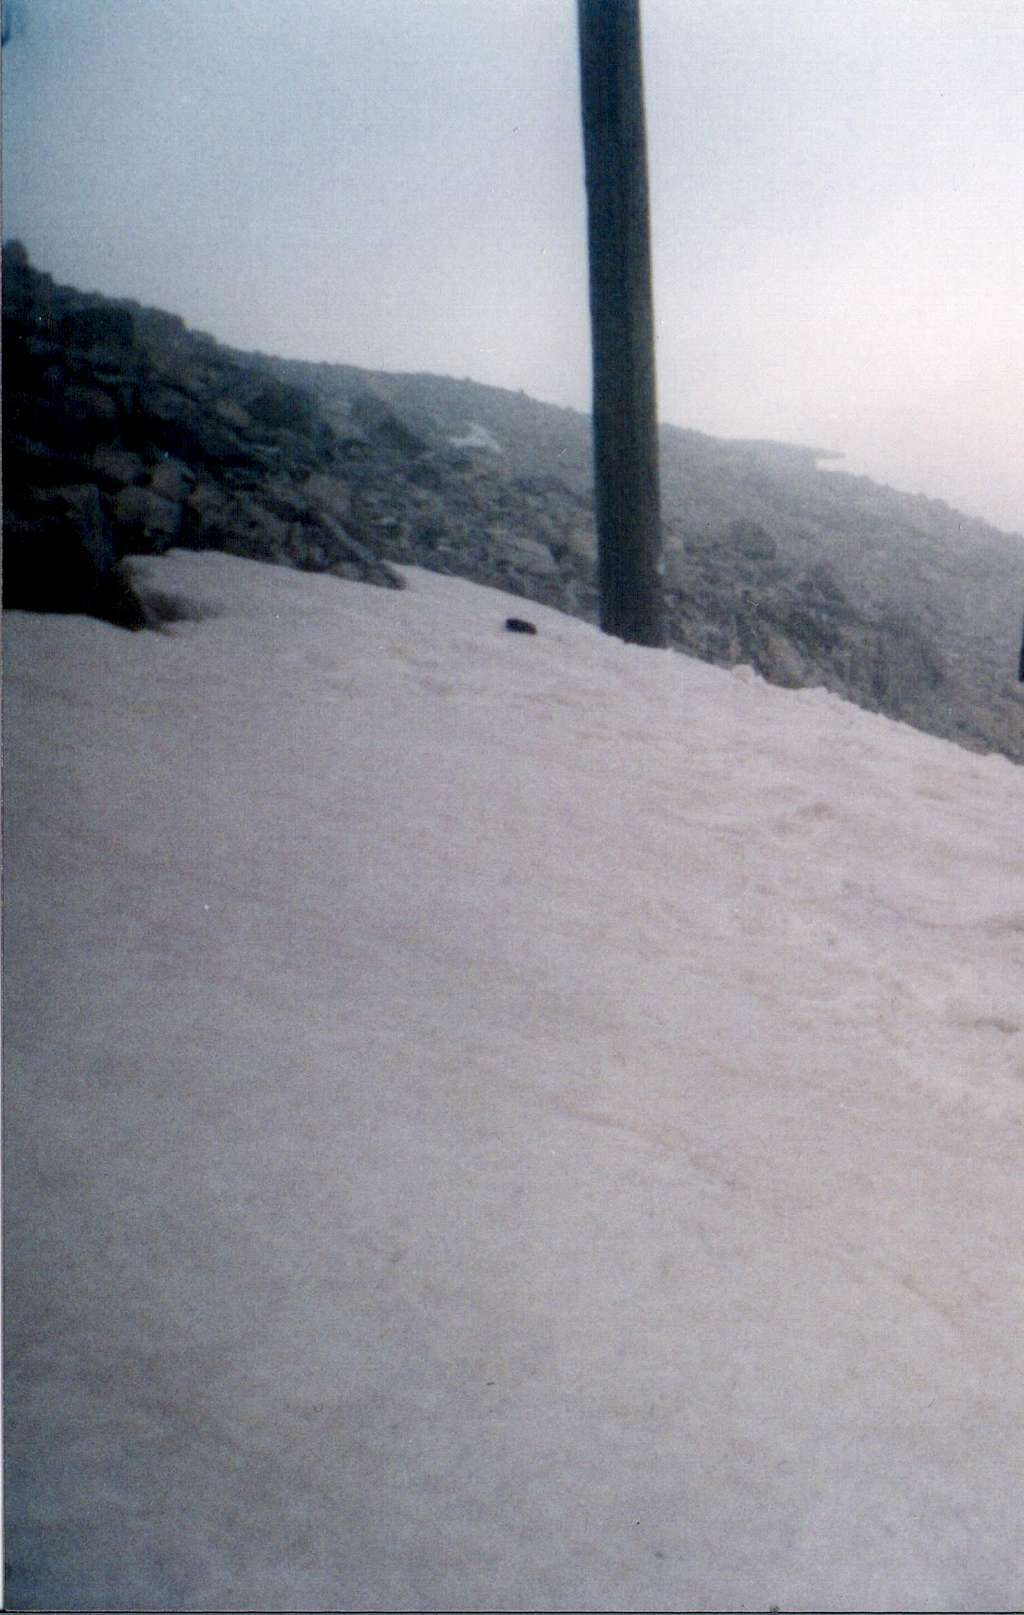 Remains of snow,near the peak(late March 2005)